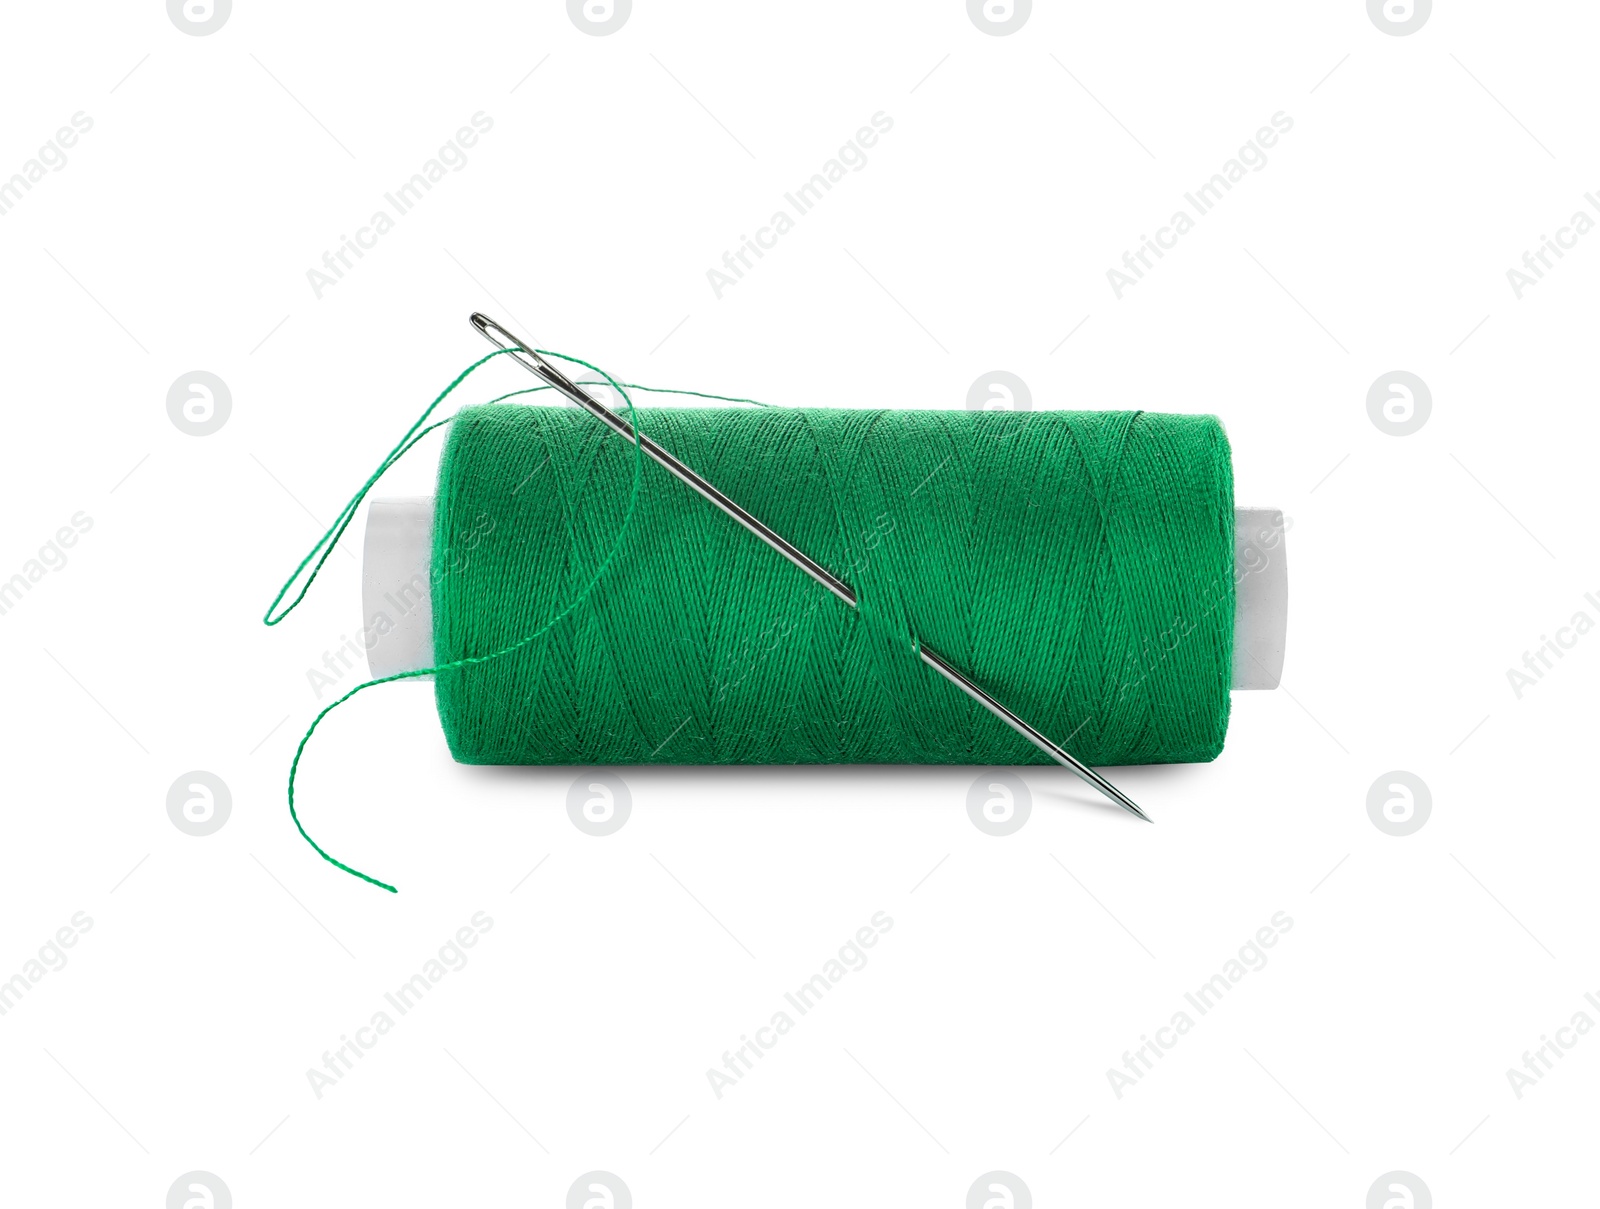 Photo of Spool of green sewing thread with needle isolated on white